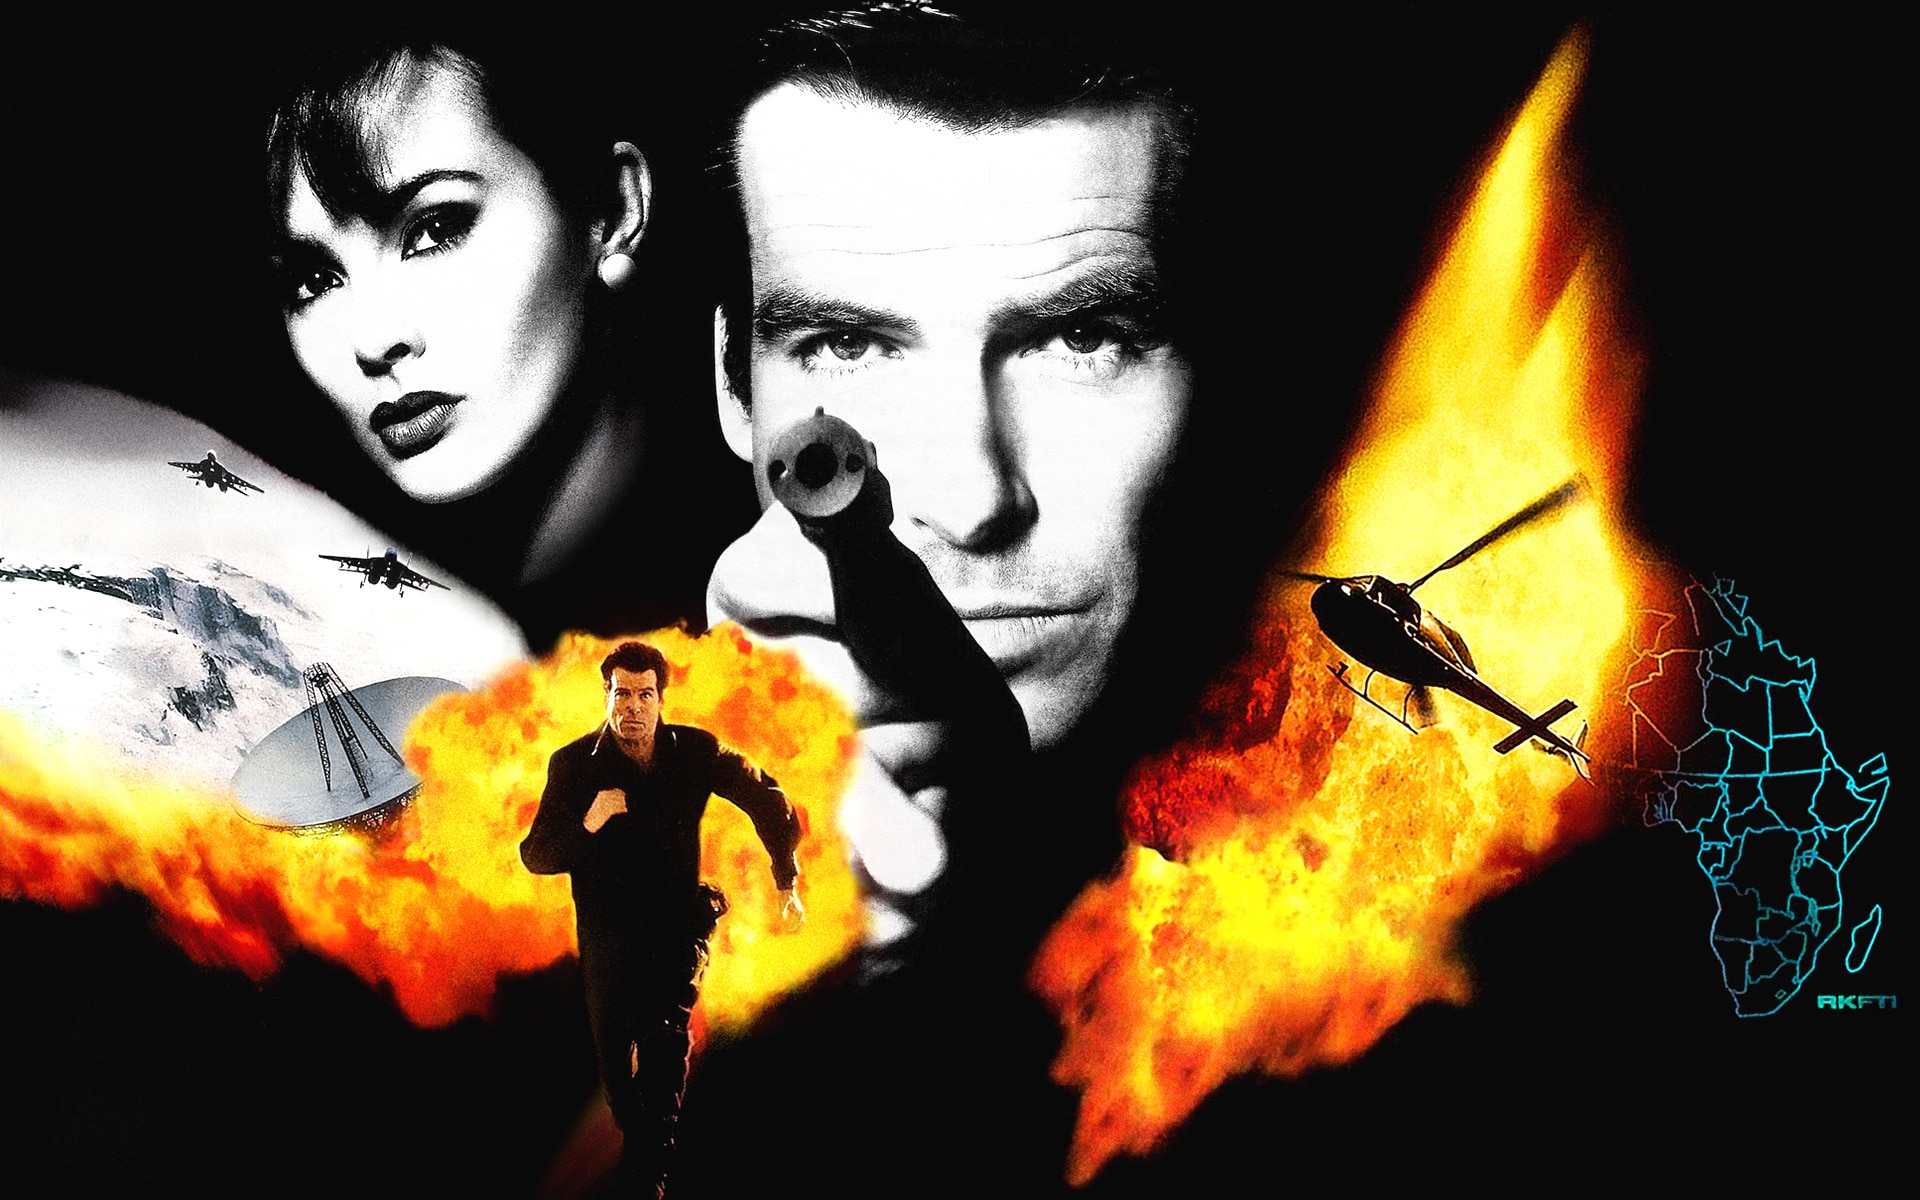 GoldenEye 007 – Xbox achievements and more have popped up